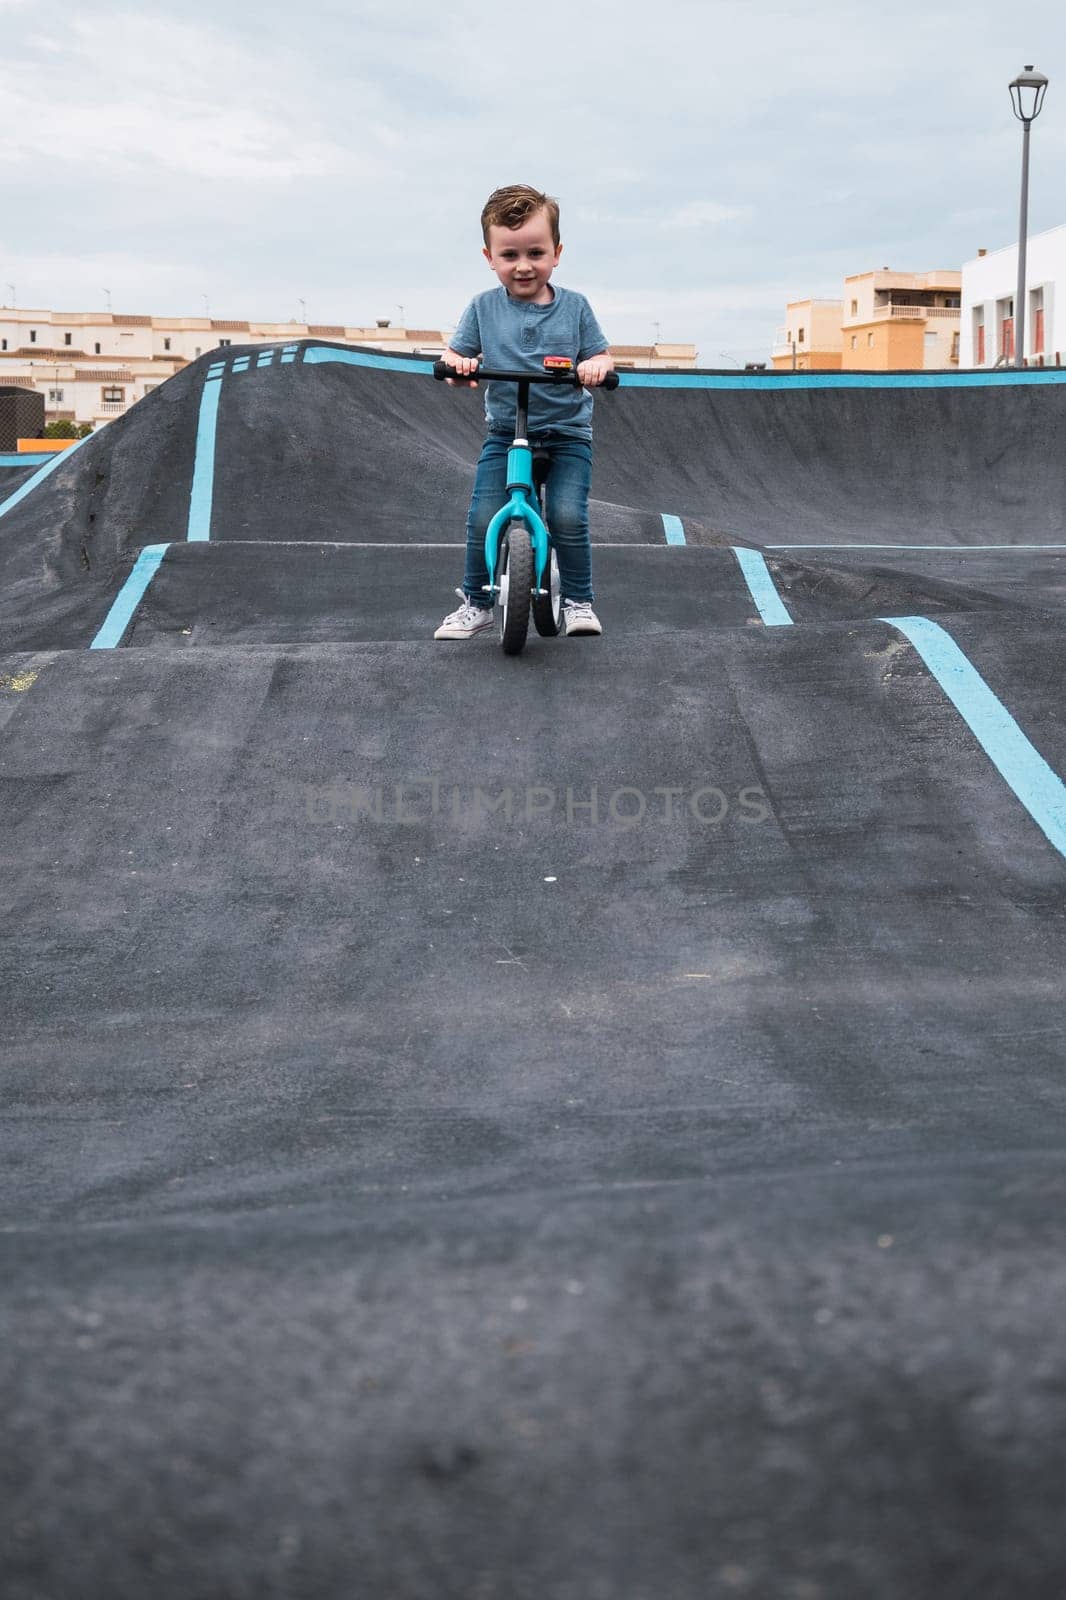 A young child rides the new South Glenmore Park BMX pump track on his bike on a summer evening in Calgary Alberta Canada.